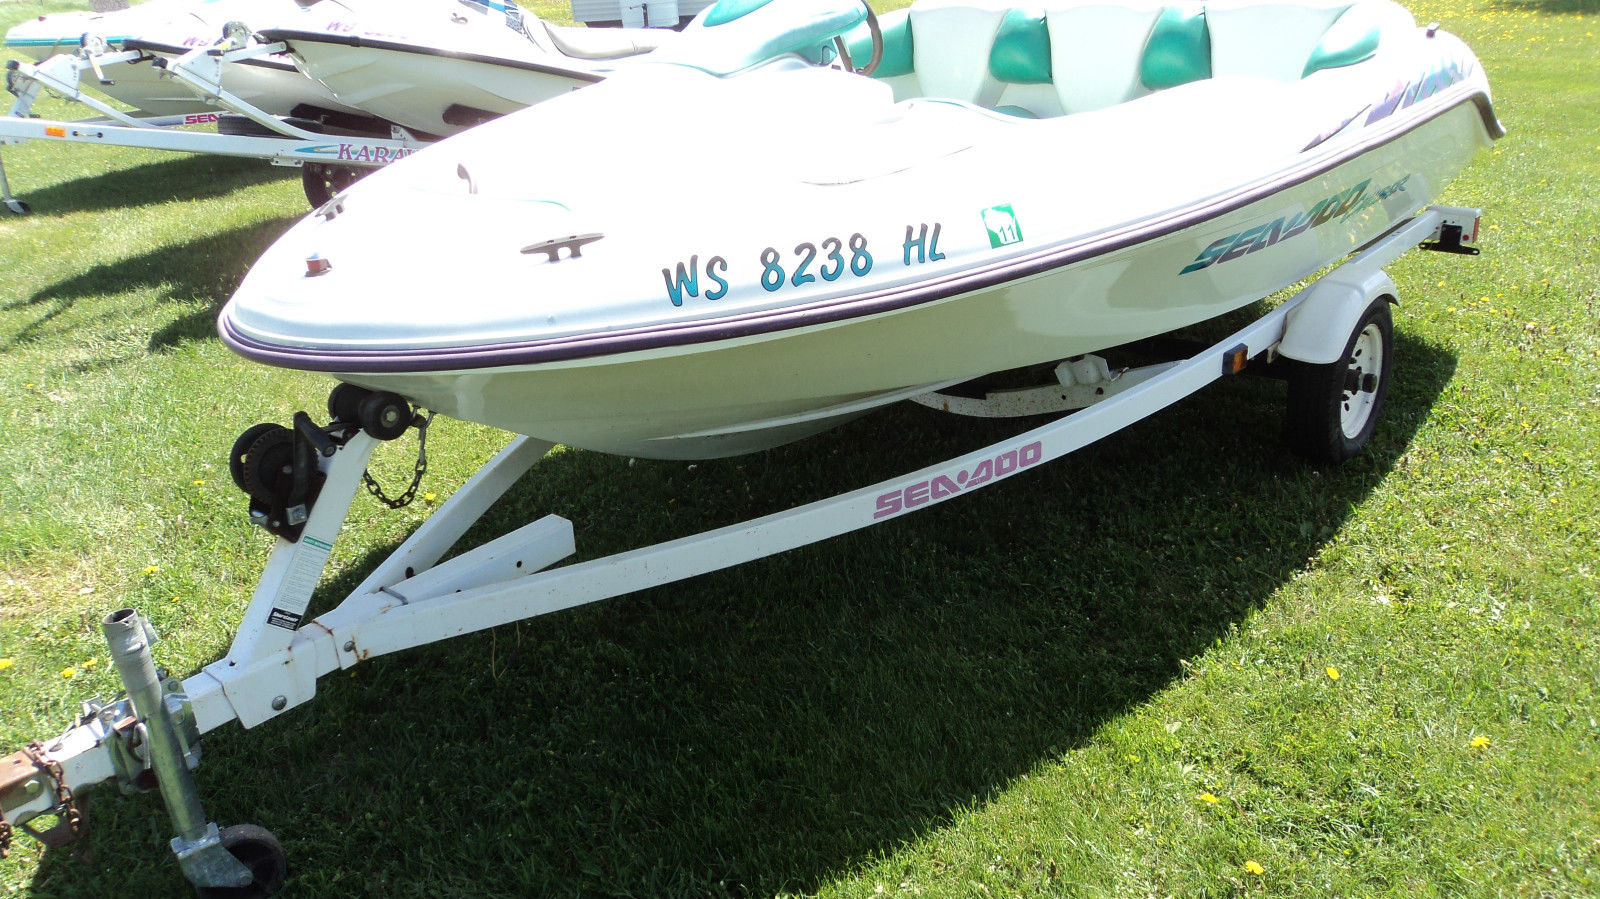 SEA DOO SPORTSTER boat for sale from USA